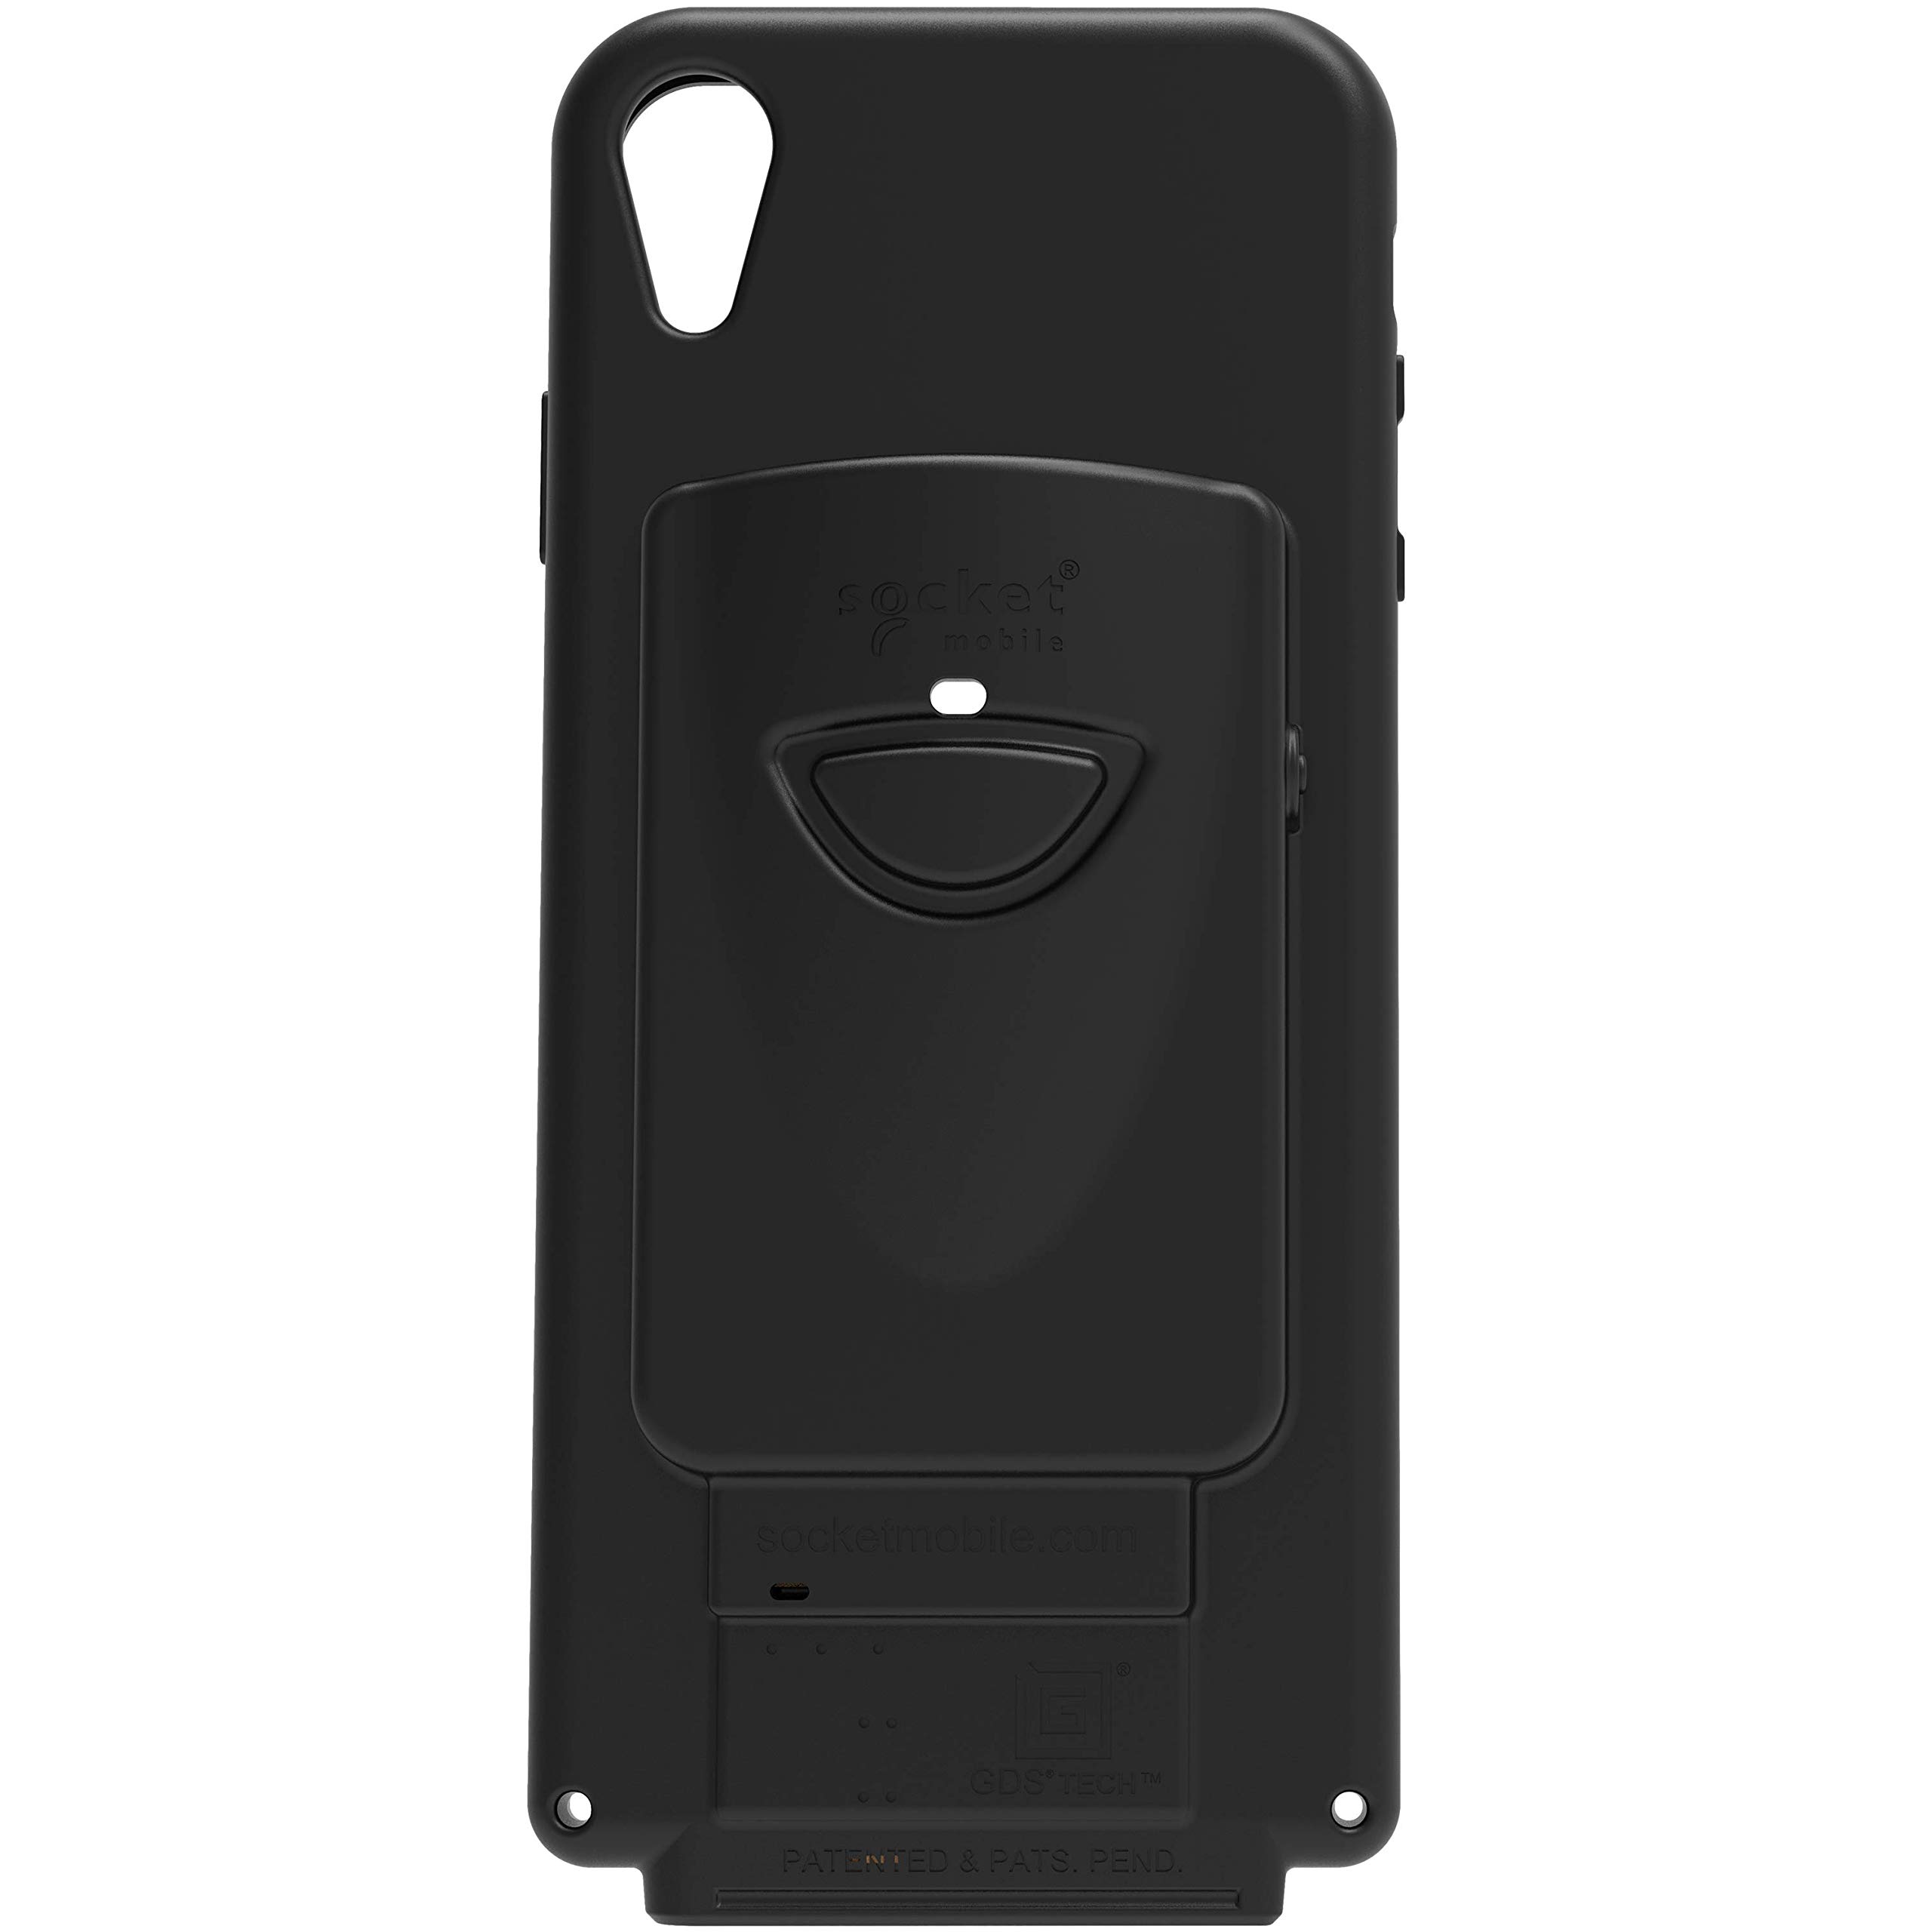 DURACASE FOR IPHONE XR .